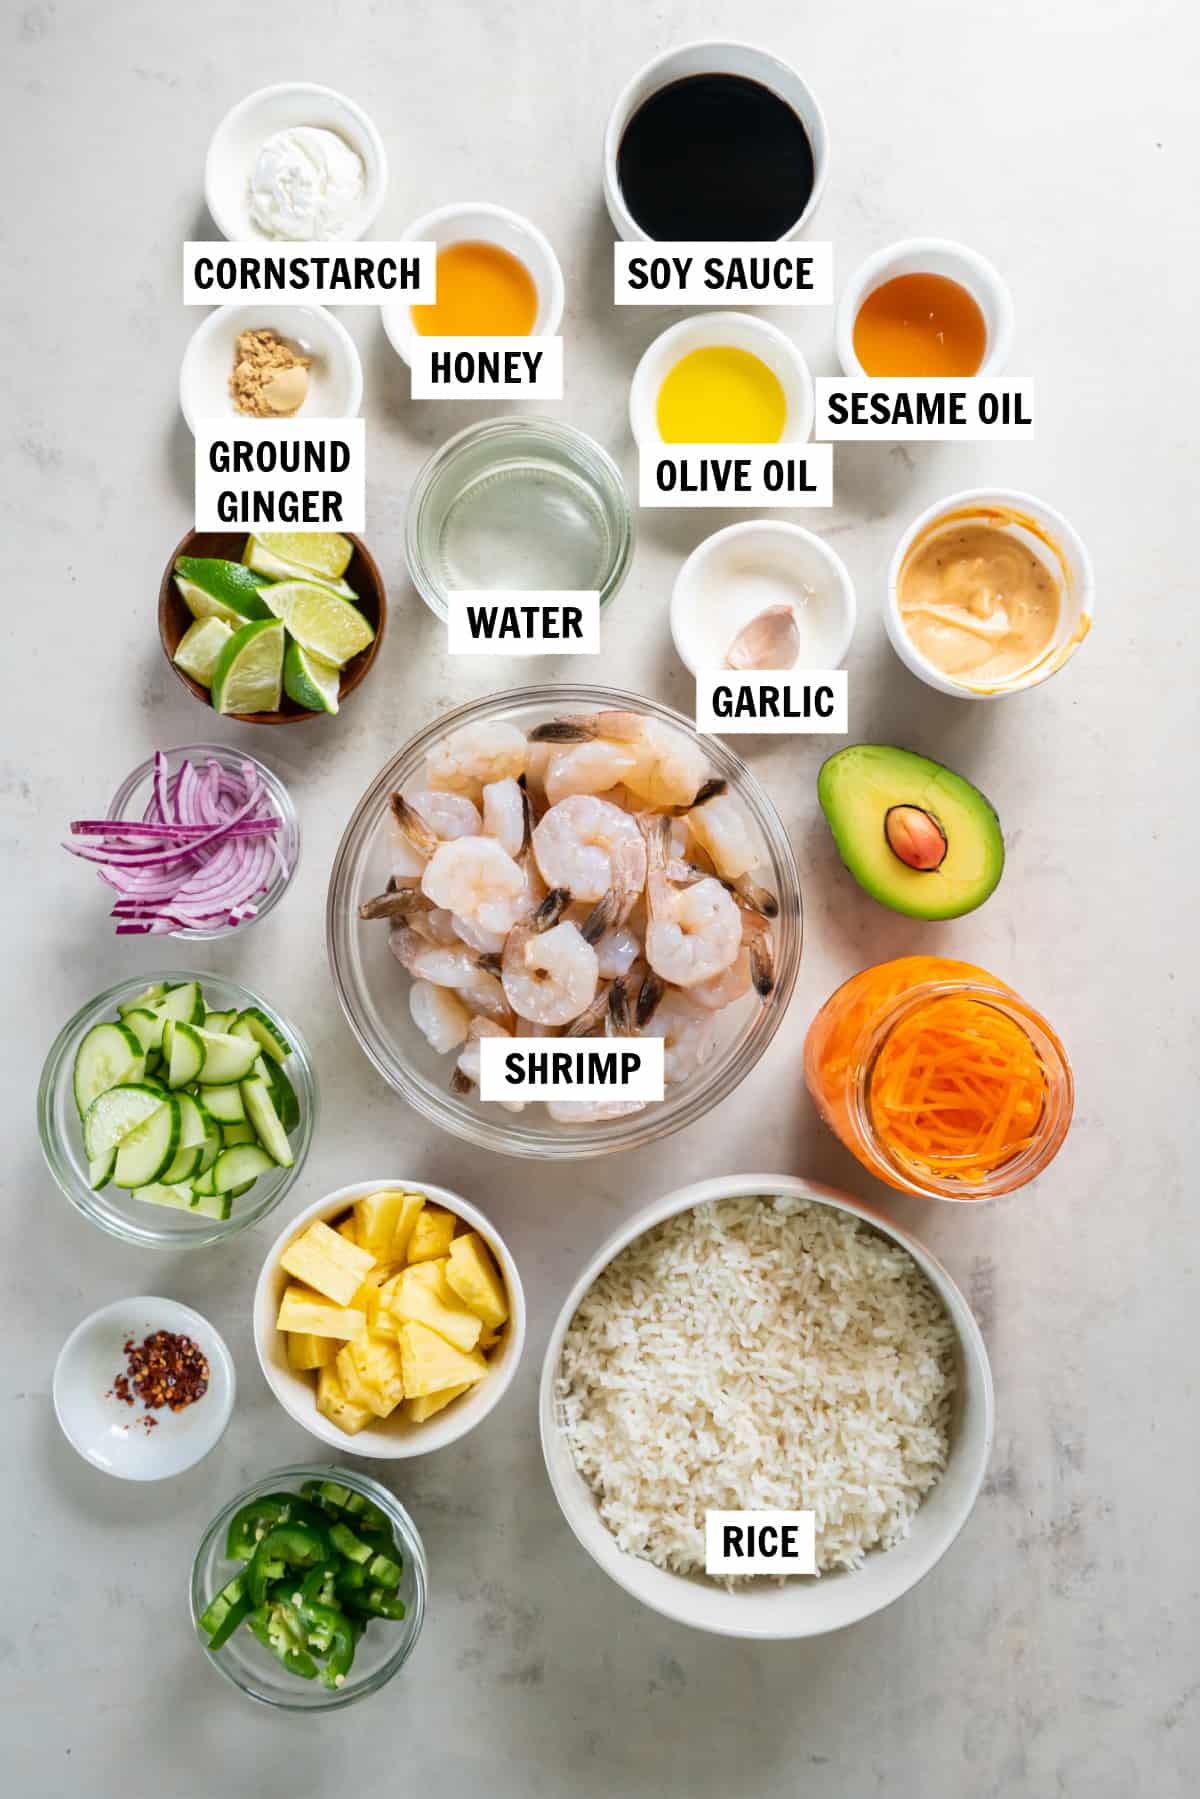 All of the ingredients for shrimp and rice bowl on a white countertop including rice, shrimp, soy sauce, honey, ground ginger, olive oil, cornstarch and water.